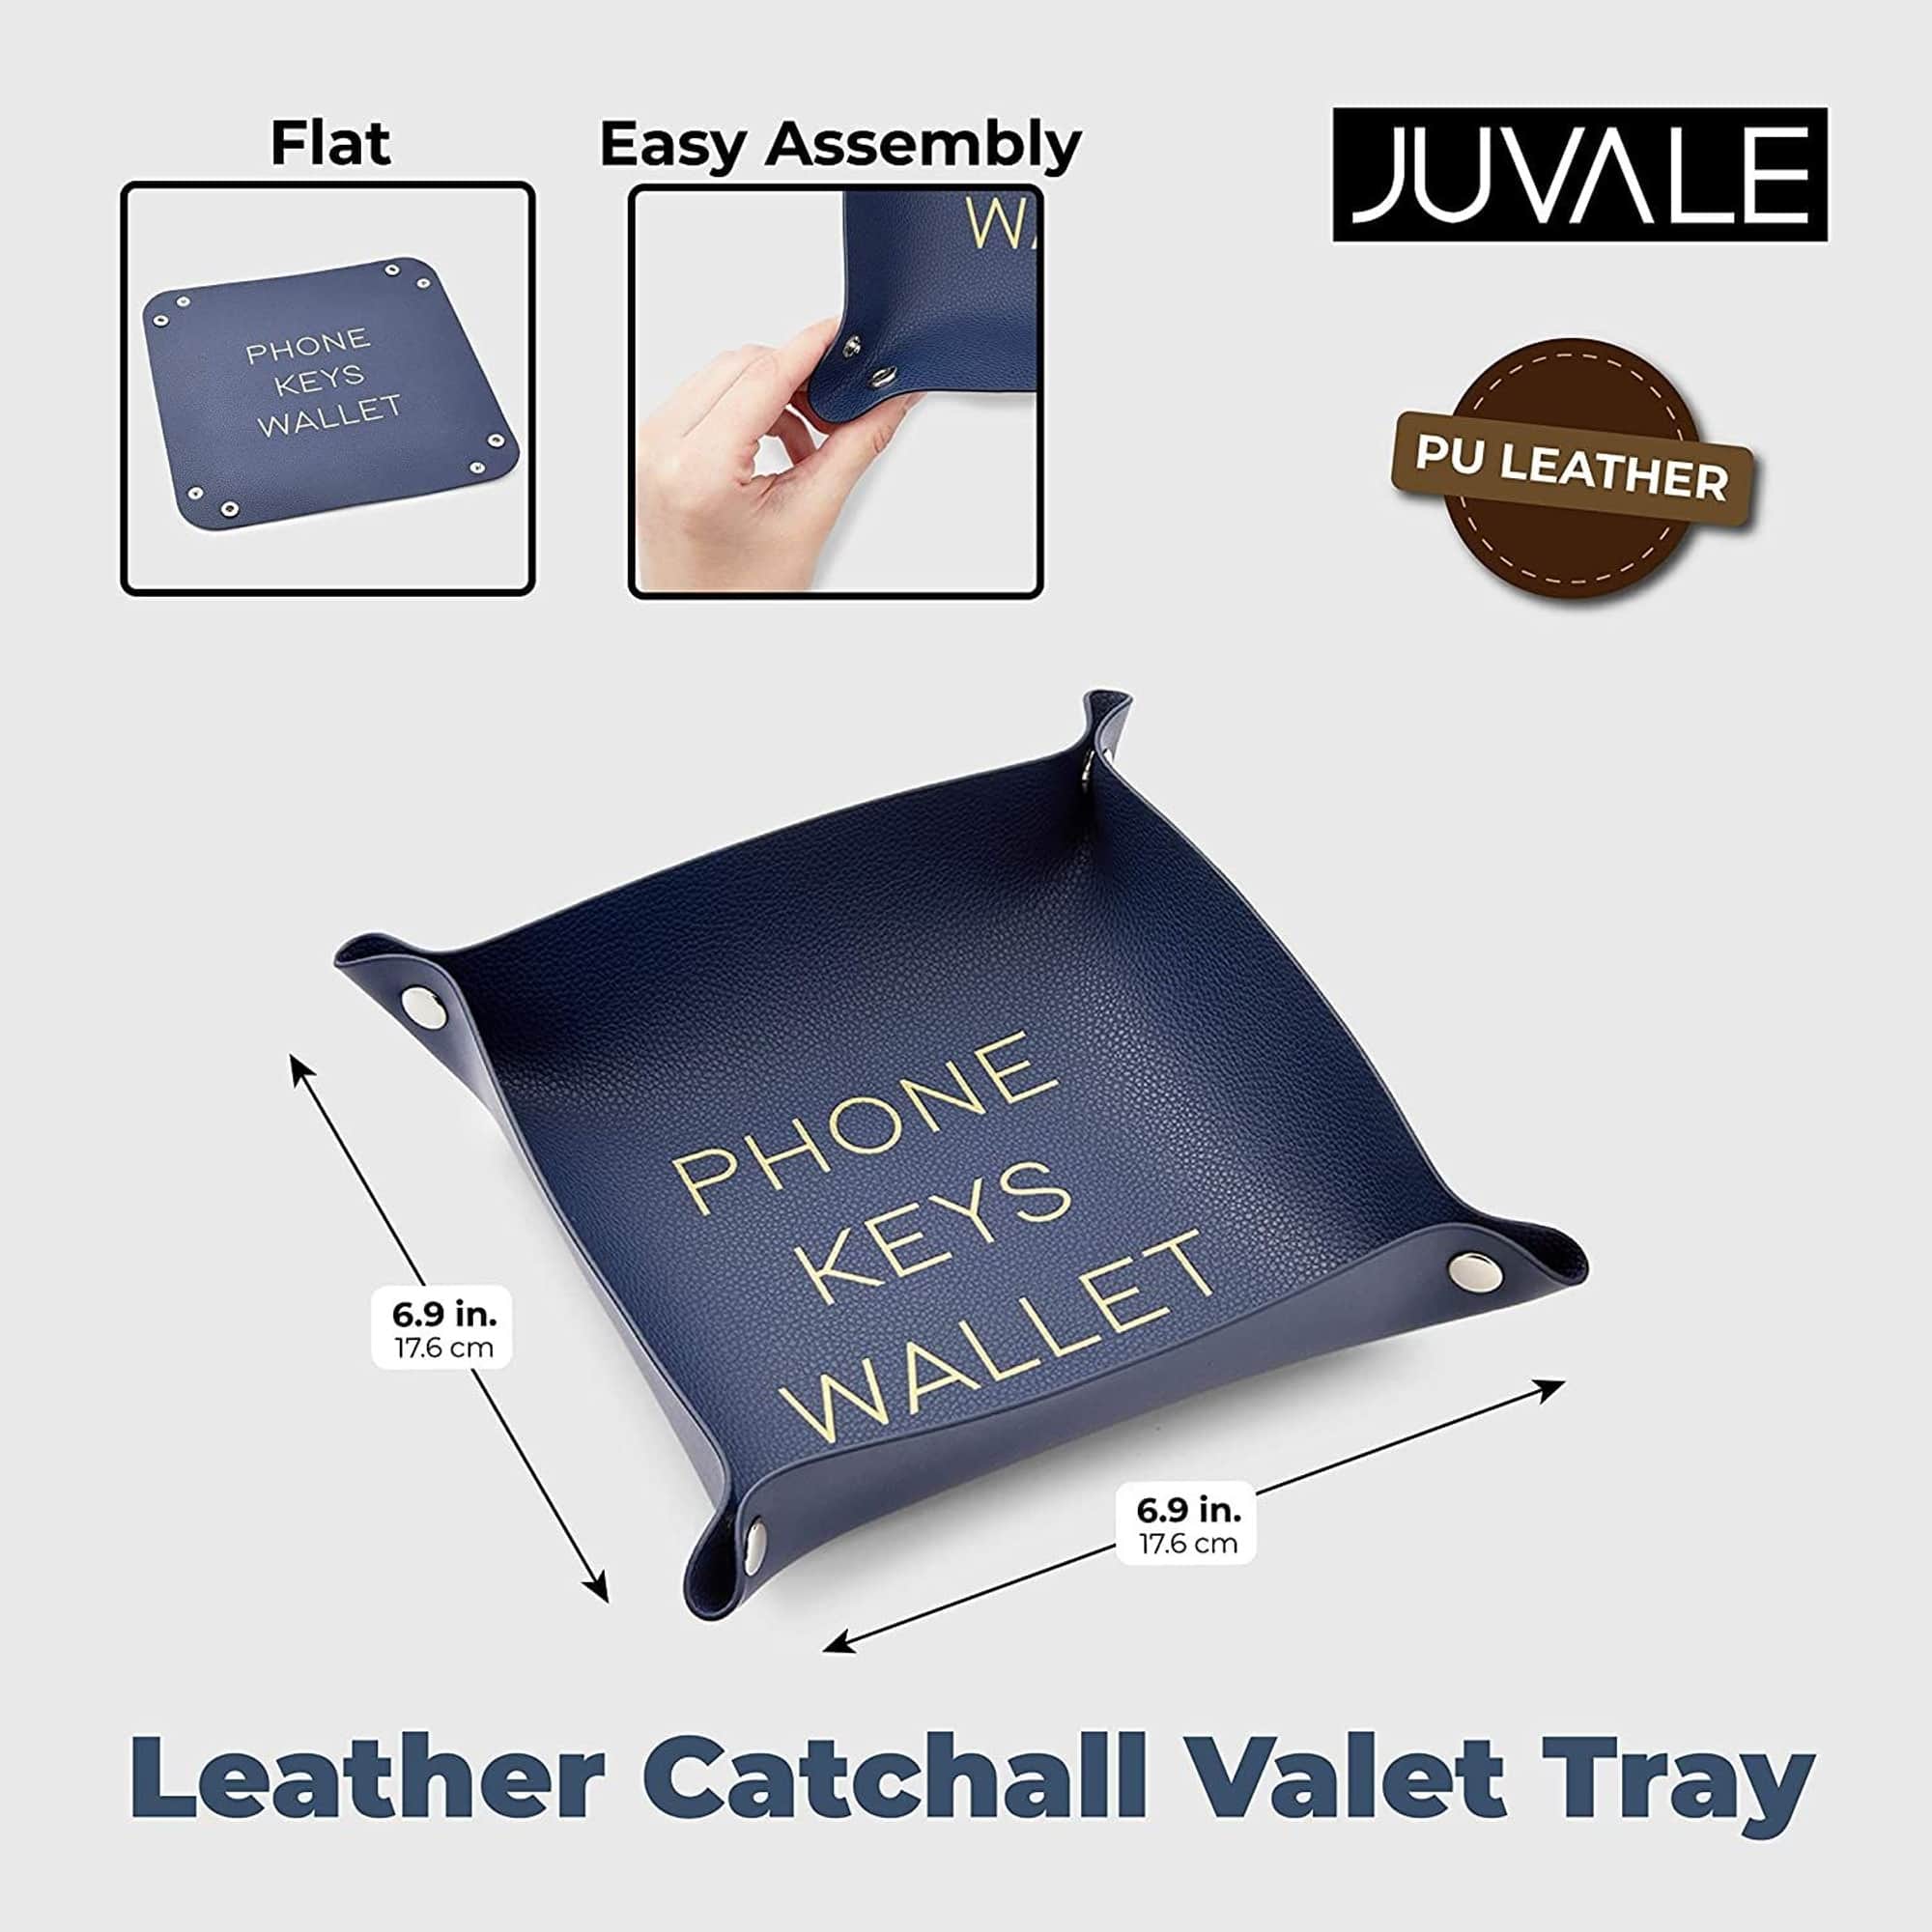 Juvale Leather Catchall Valet Tray for Phone, Keys, Wallet (Navy Blue ...